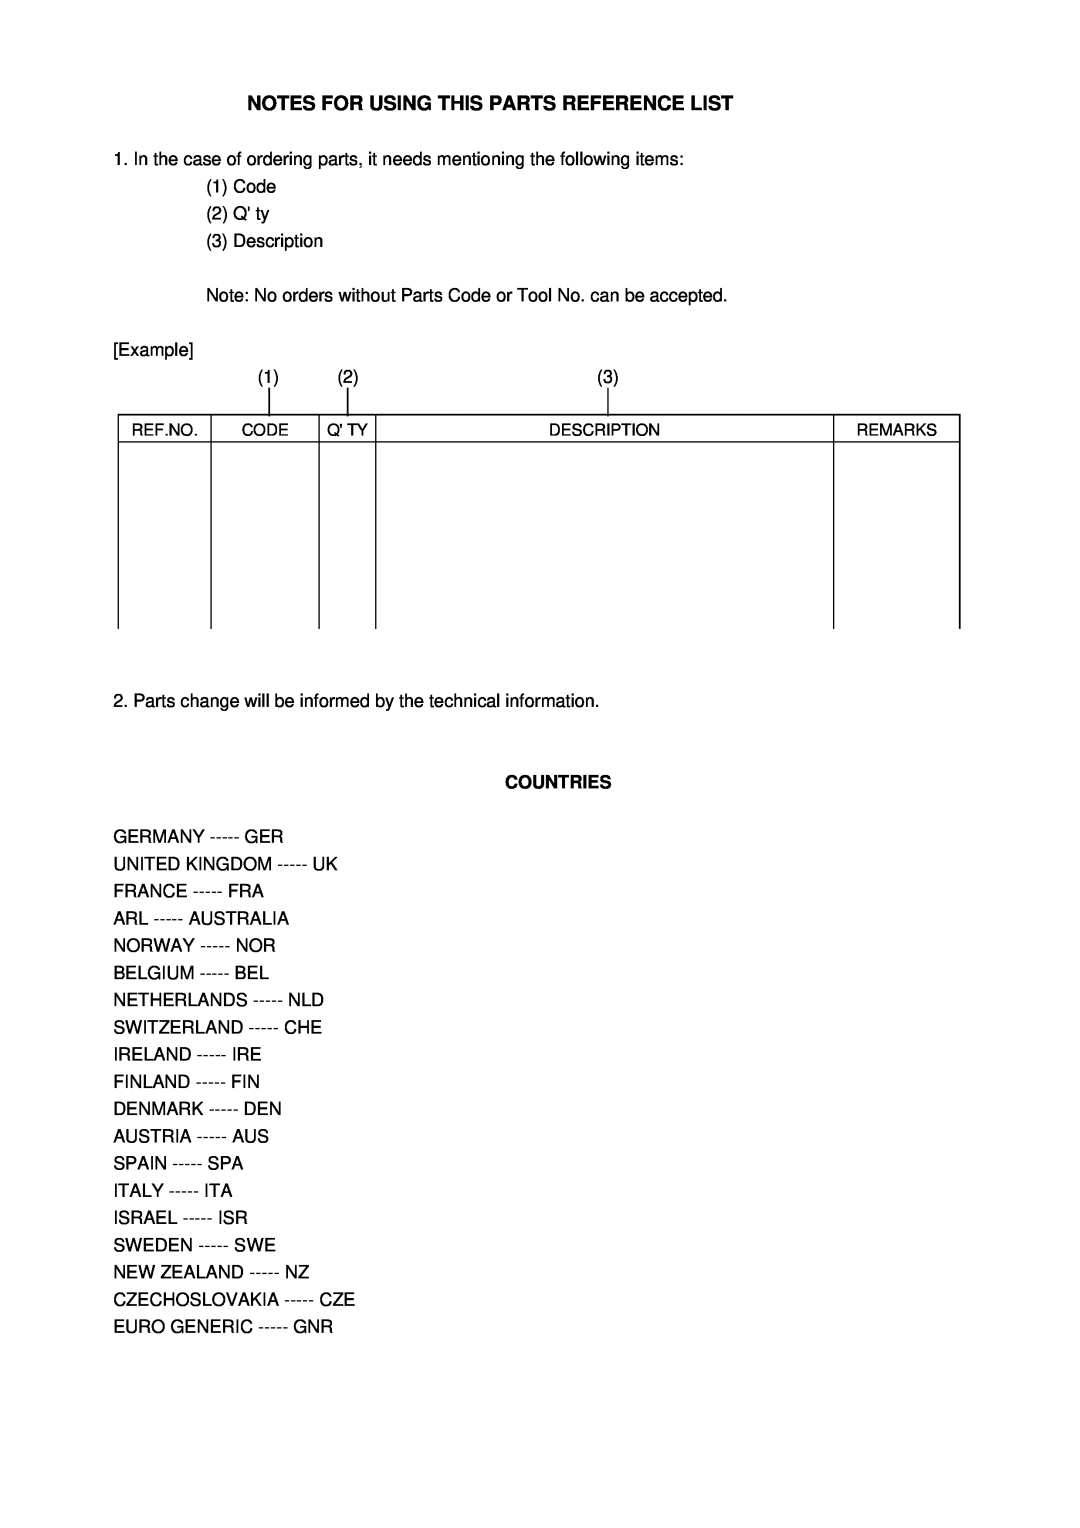 Brother FAX-910 manual Notes For Using This Parts Reference List, Countries 